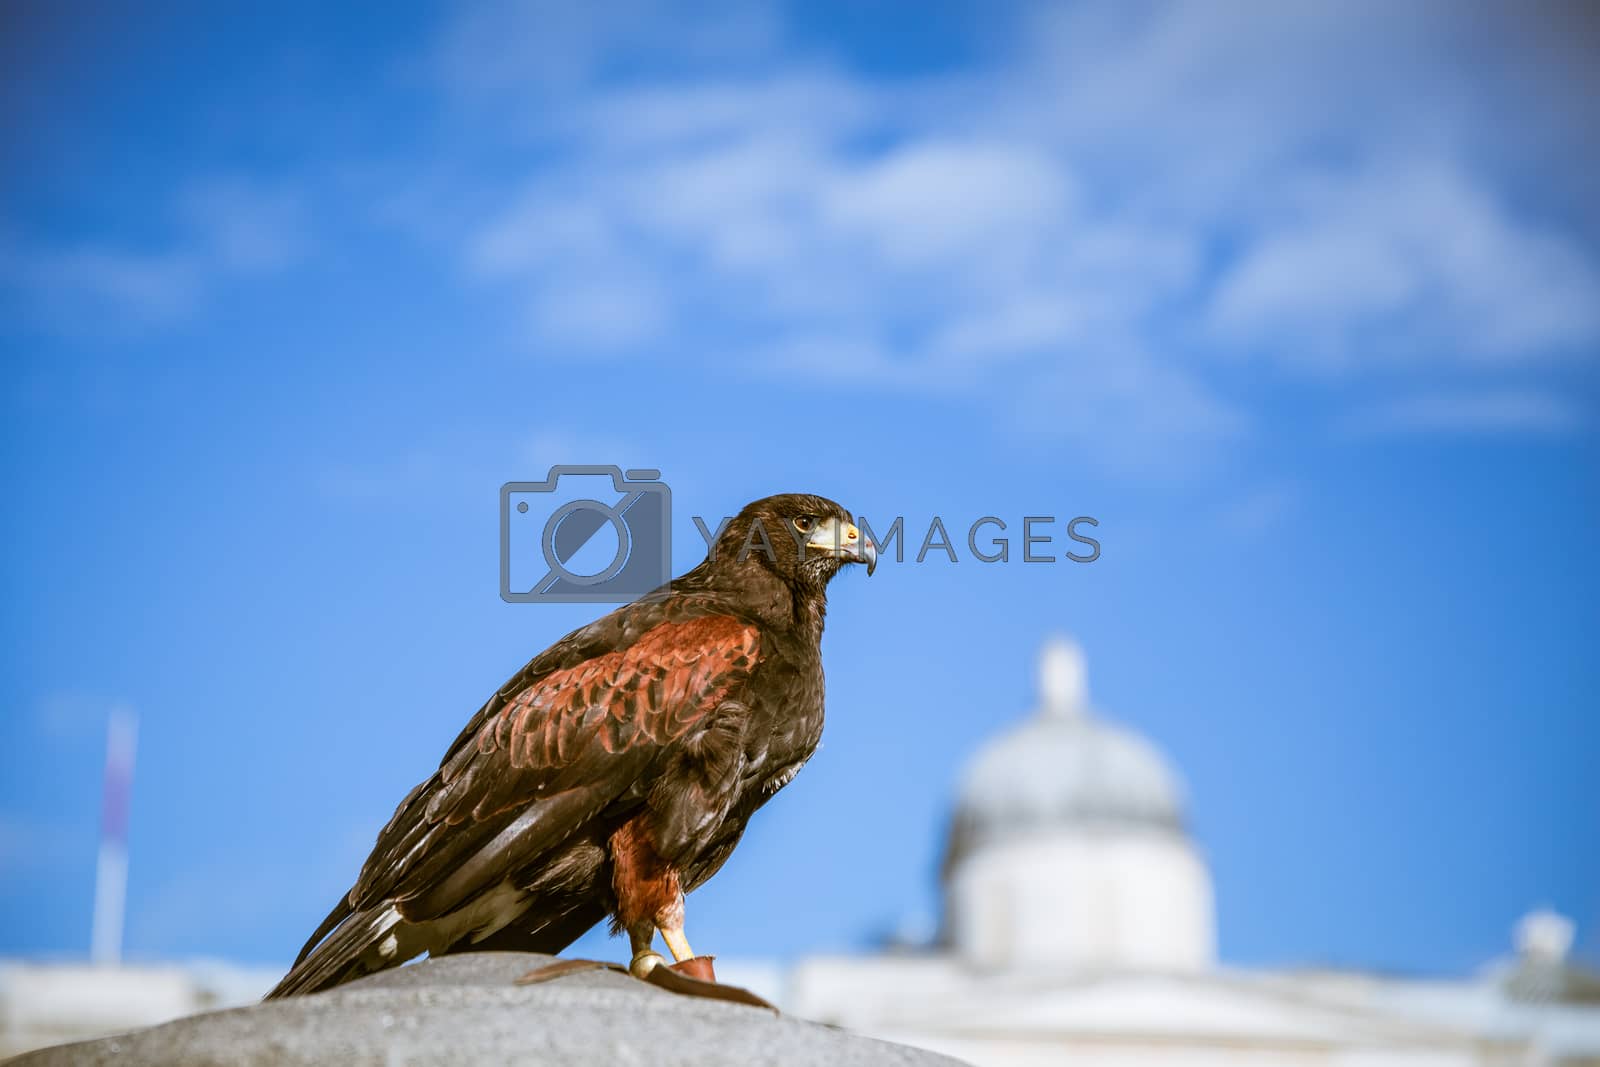 Royalty free image of Majestic eagles in London by nektarstock